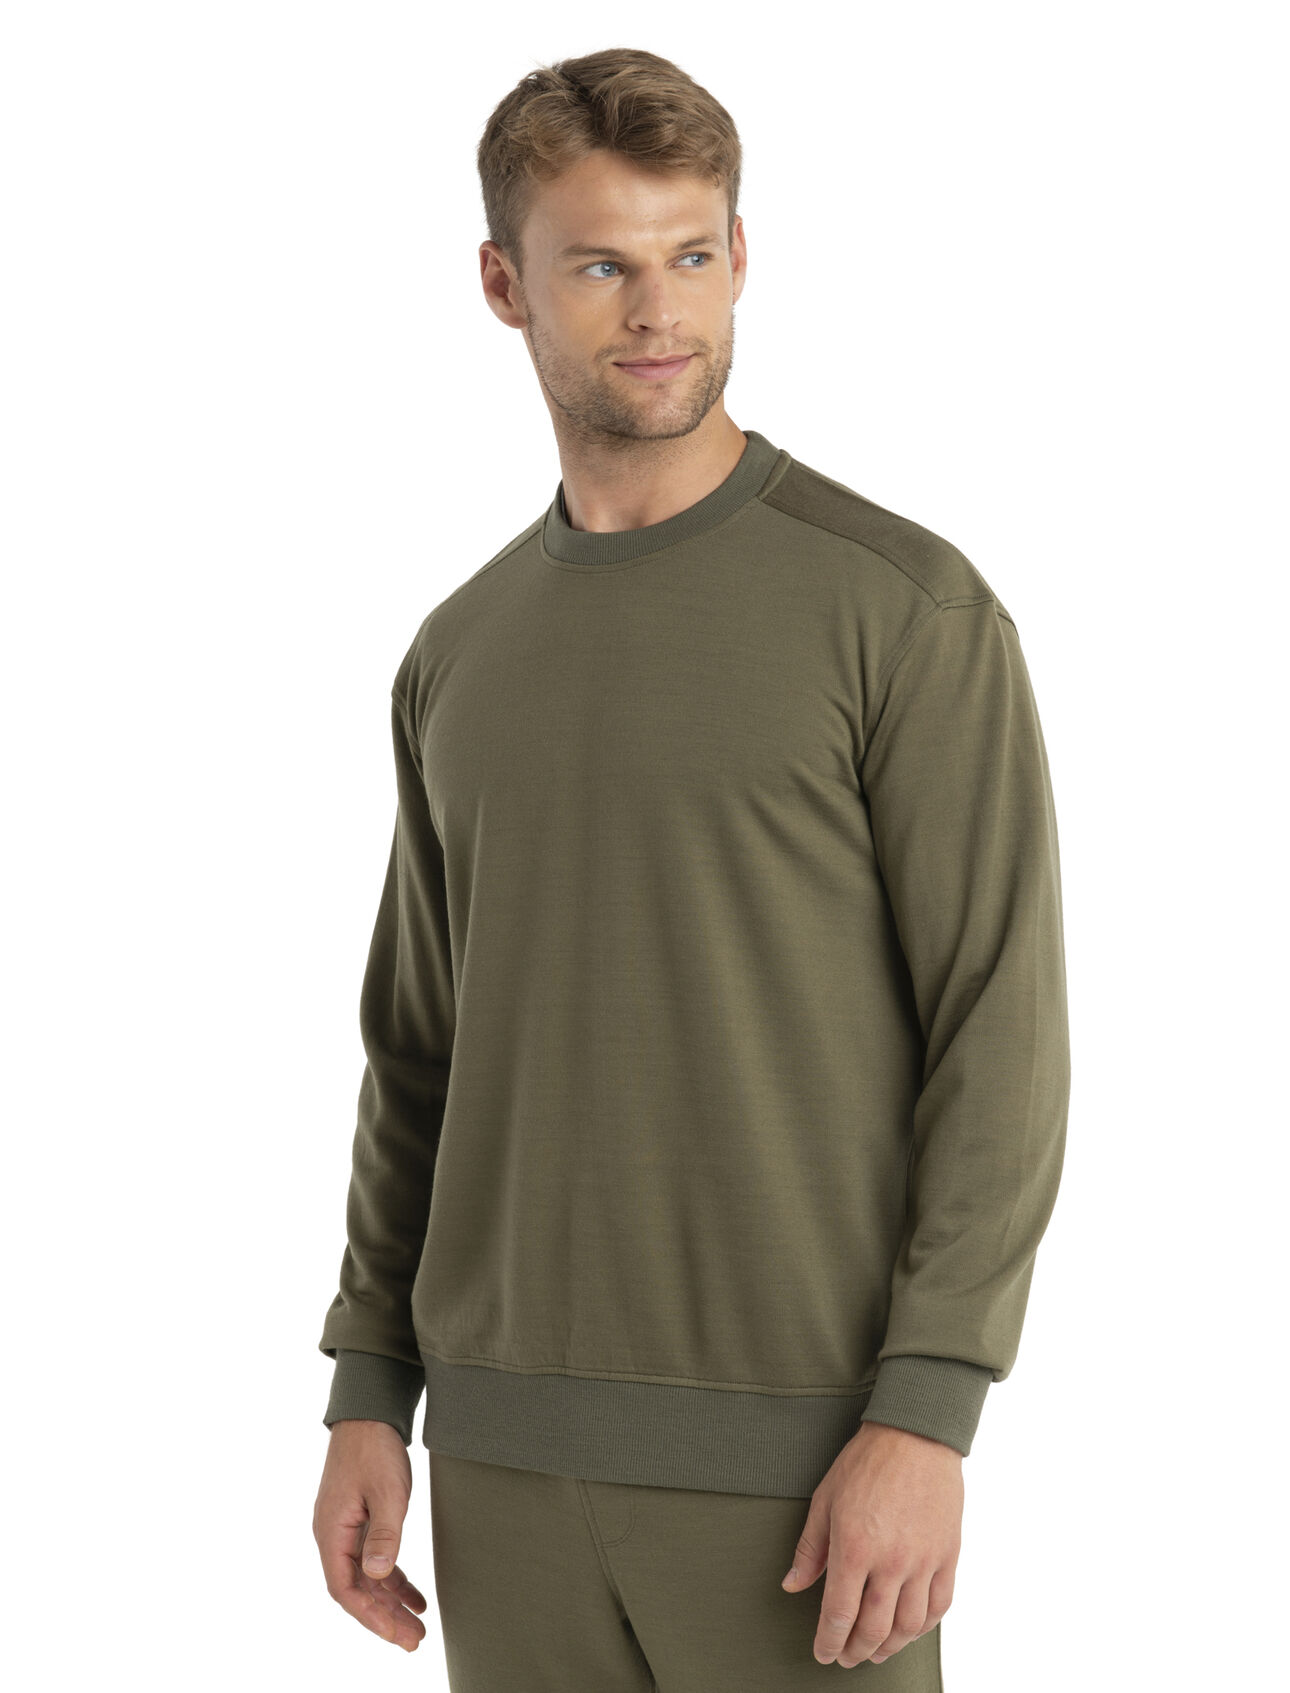 Mens Merino Blend Shifter II Long Sleeve Sweatshirt The ultimate before and after pullover made with our Eucaform terry fabric that blends merino wool and TENCEL™ Lyocell, the Shifter II Long Sleeve Sweatshirt has down time covered.